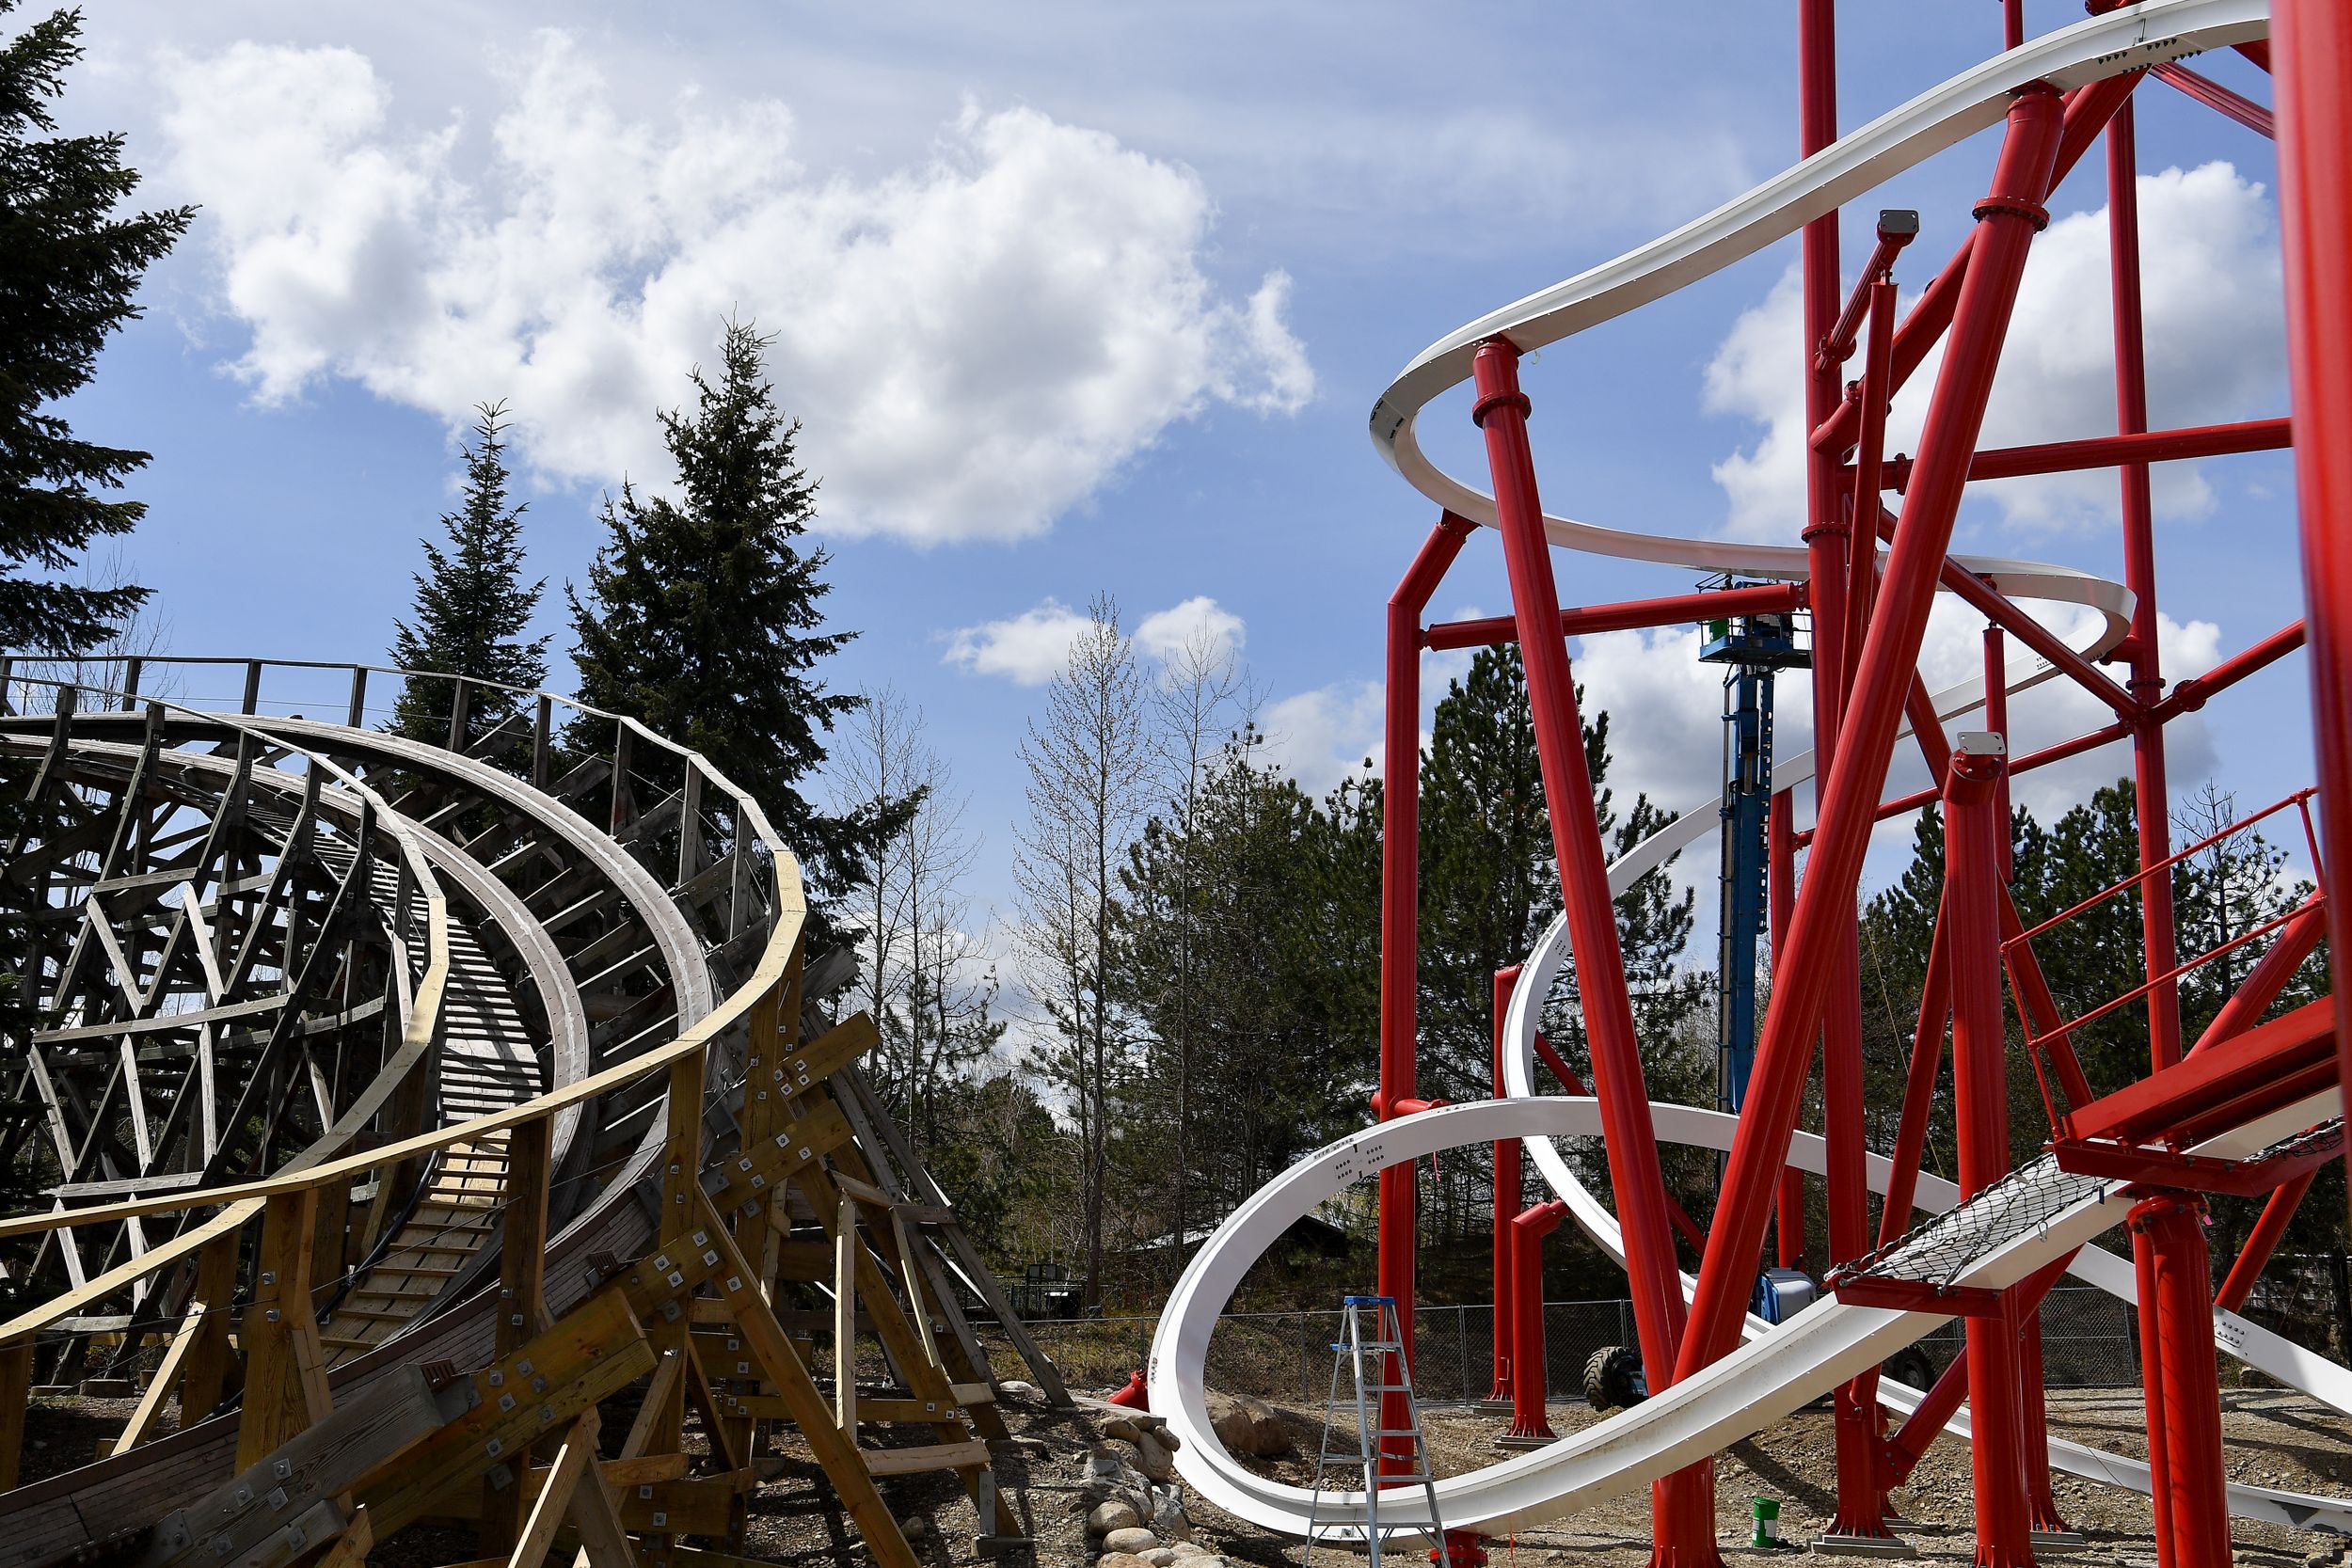 Taking To The Skies Silverwood S New Homegrown Roller Coaster Stunt Pilot Will Open In Late May The Spokesman Review